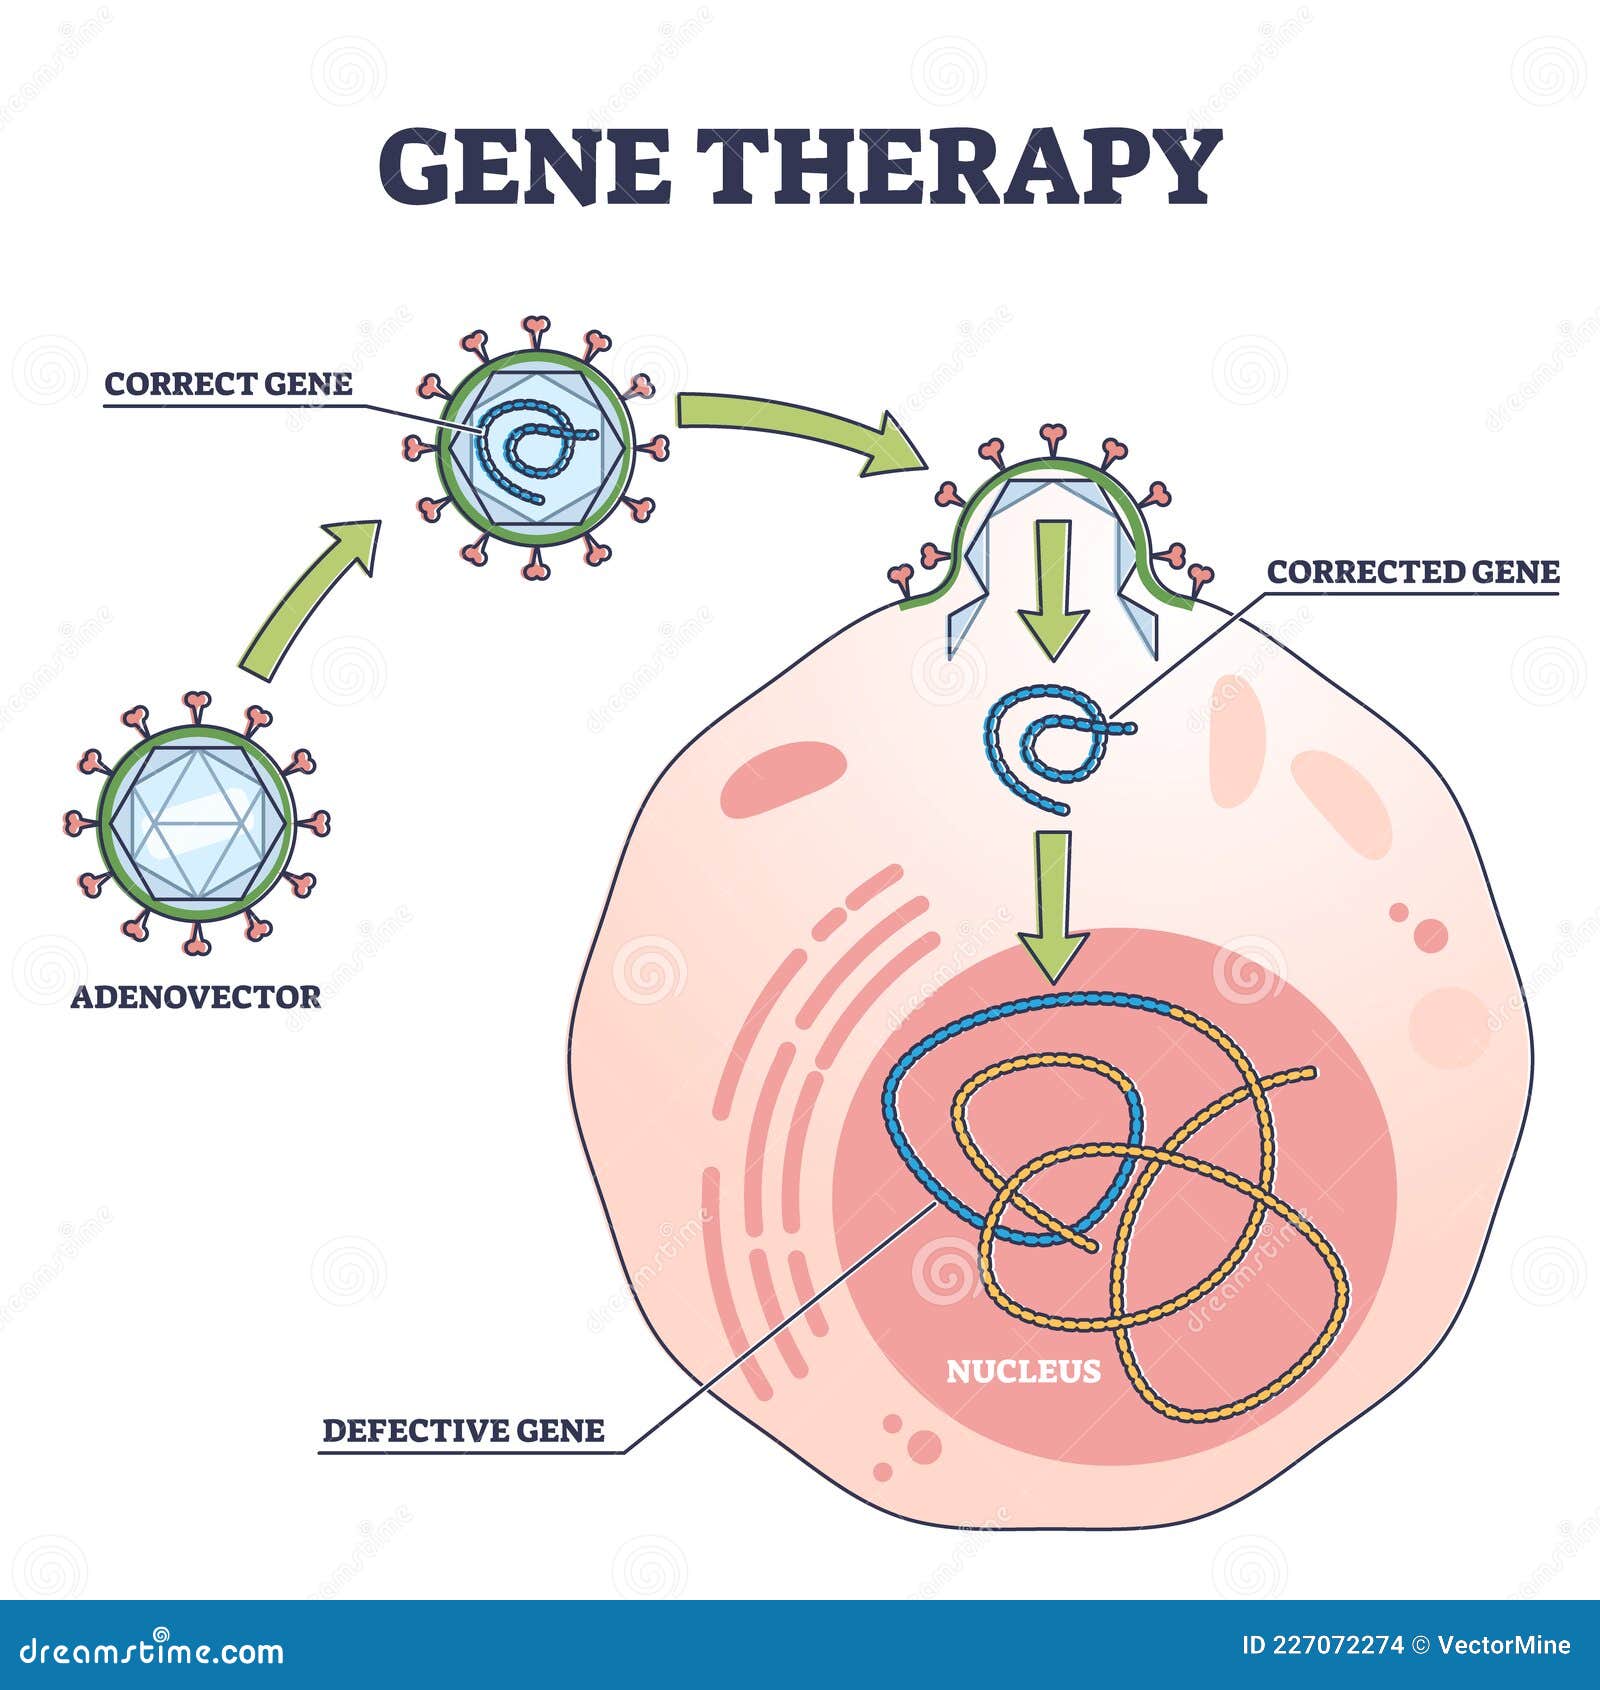 gene therapy medical treatment and correct genome replacement outline diagram